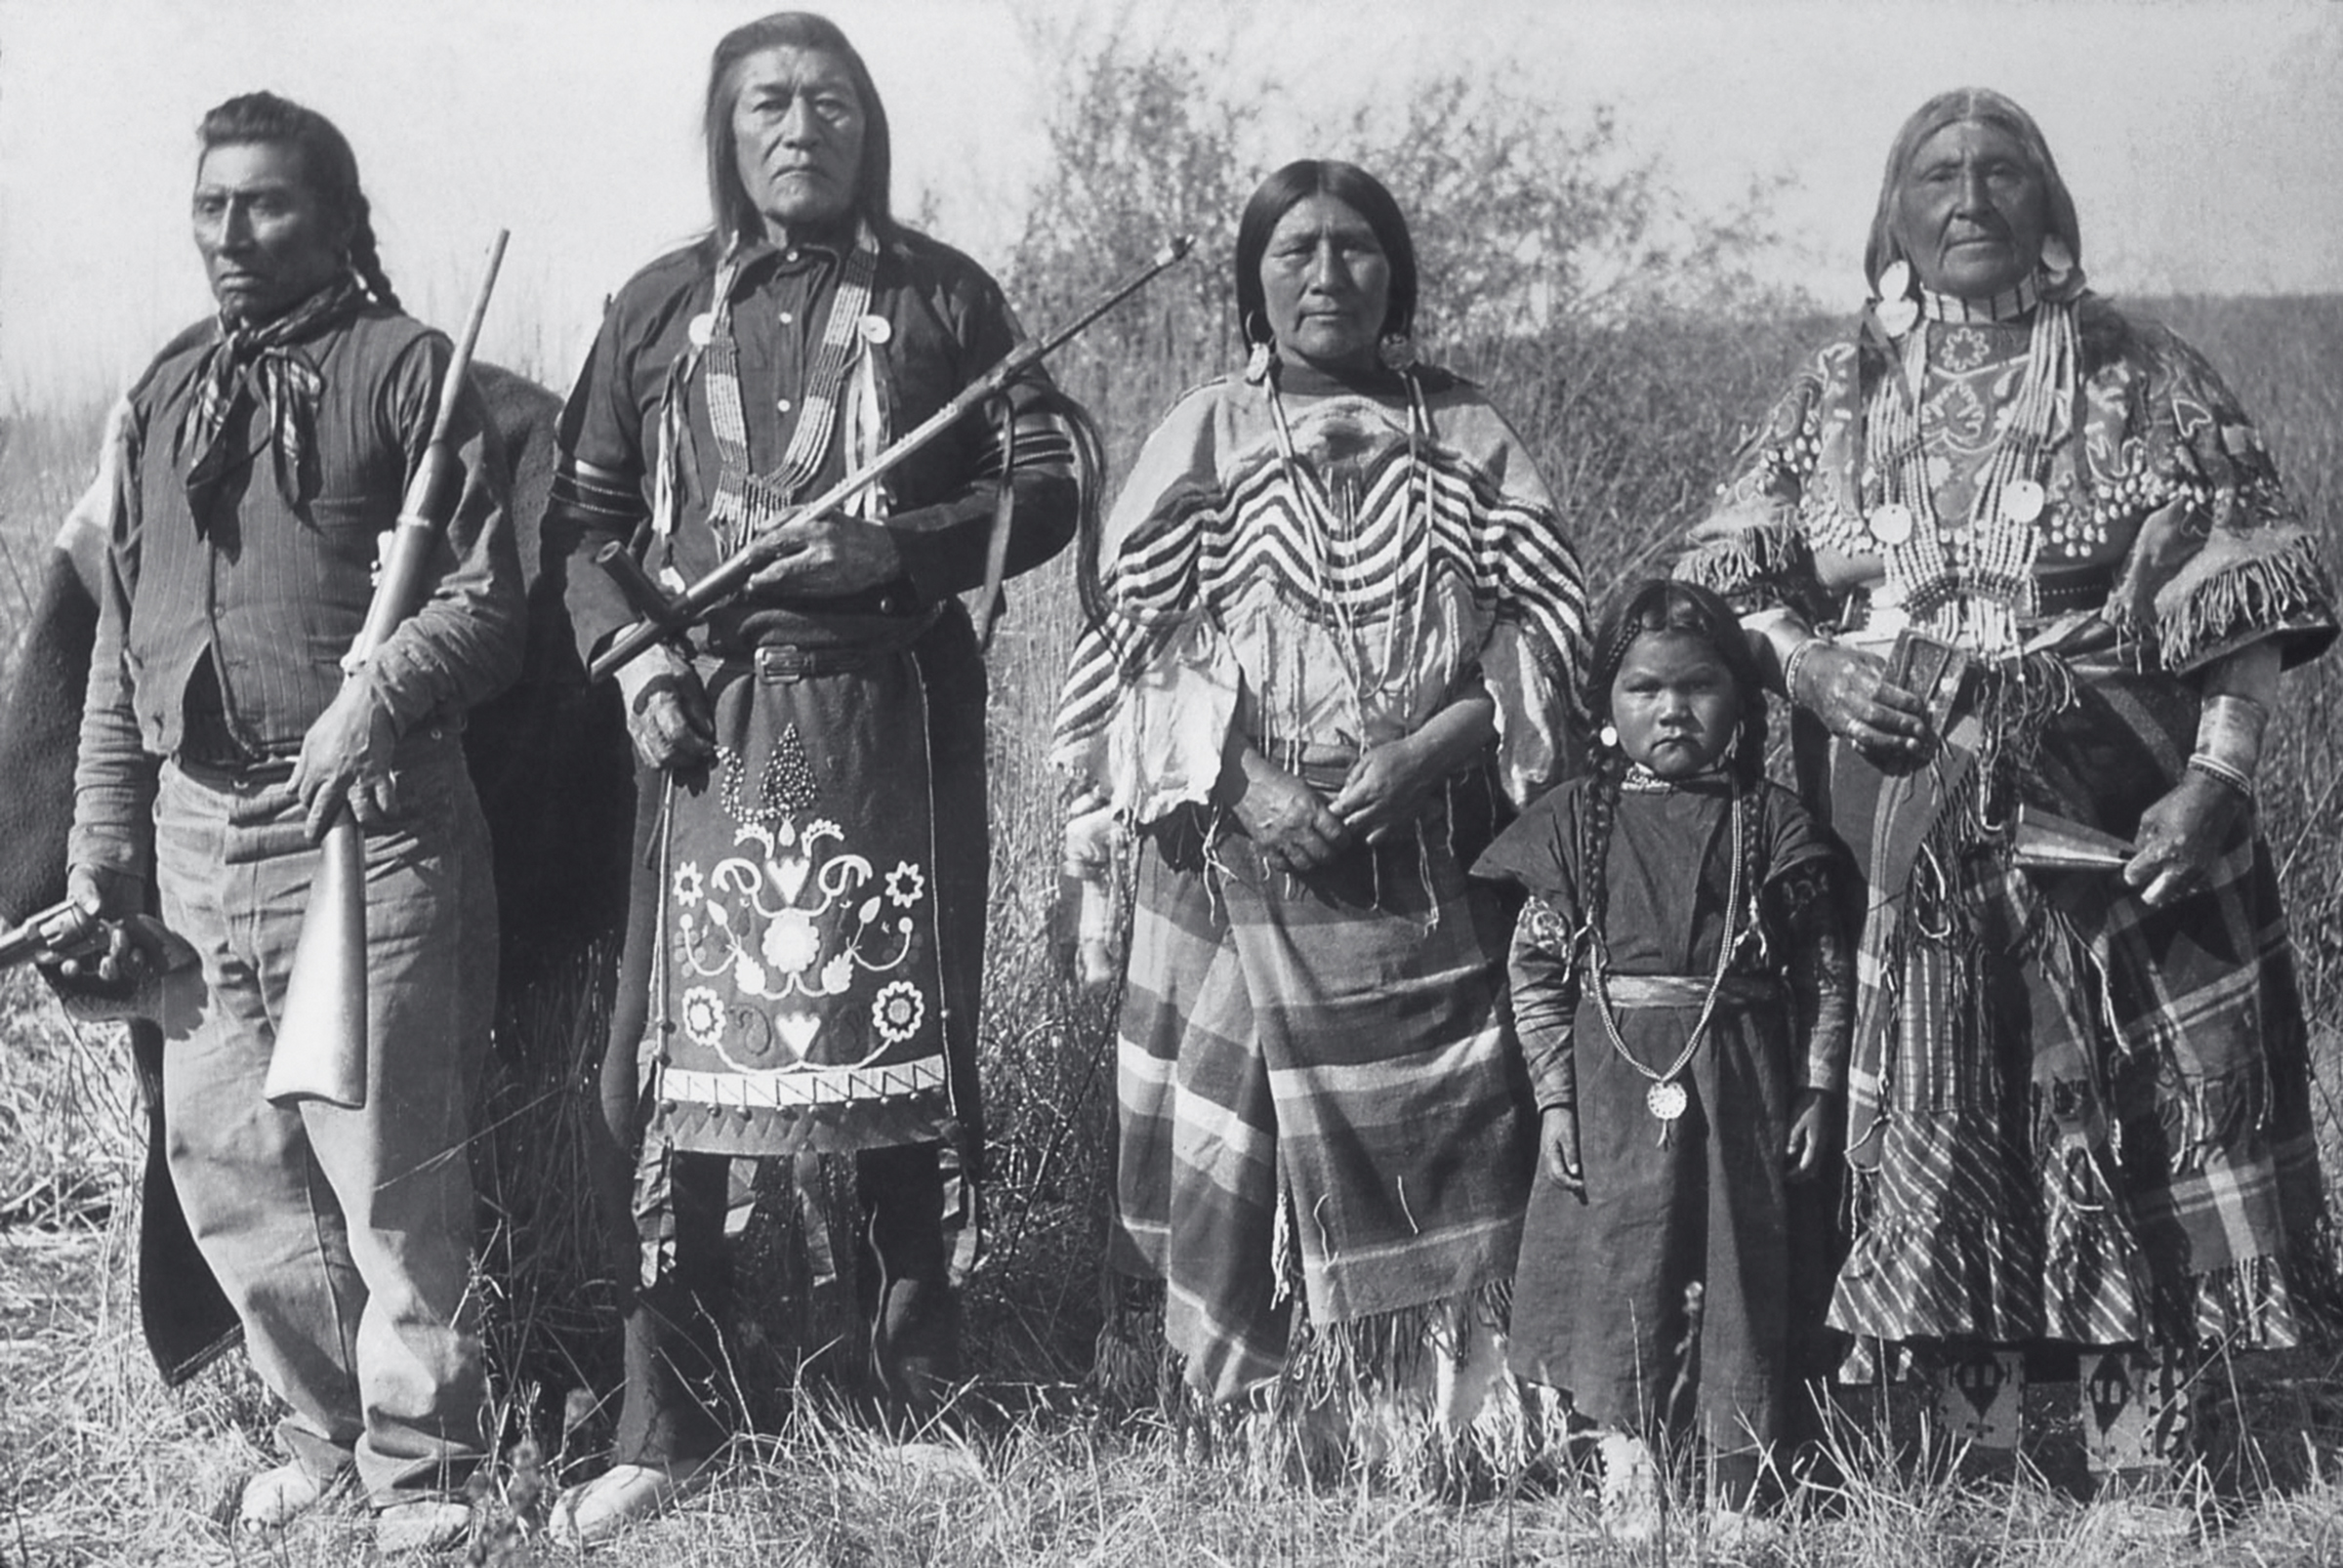 The Yellowstone region was used by indigenous people for thousands of years before Europeans arrived. The Sheep Eater, Crow, and Bannock (pictured in 1871) were among the tribes that most recently inhabited the area. When the park boundaries were established, Native Americans were actively discouraged from entering. (Photo by William Henry Jackson/National Park Service)